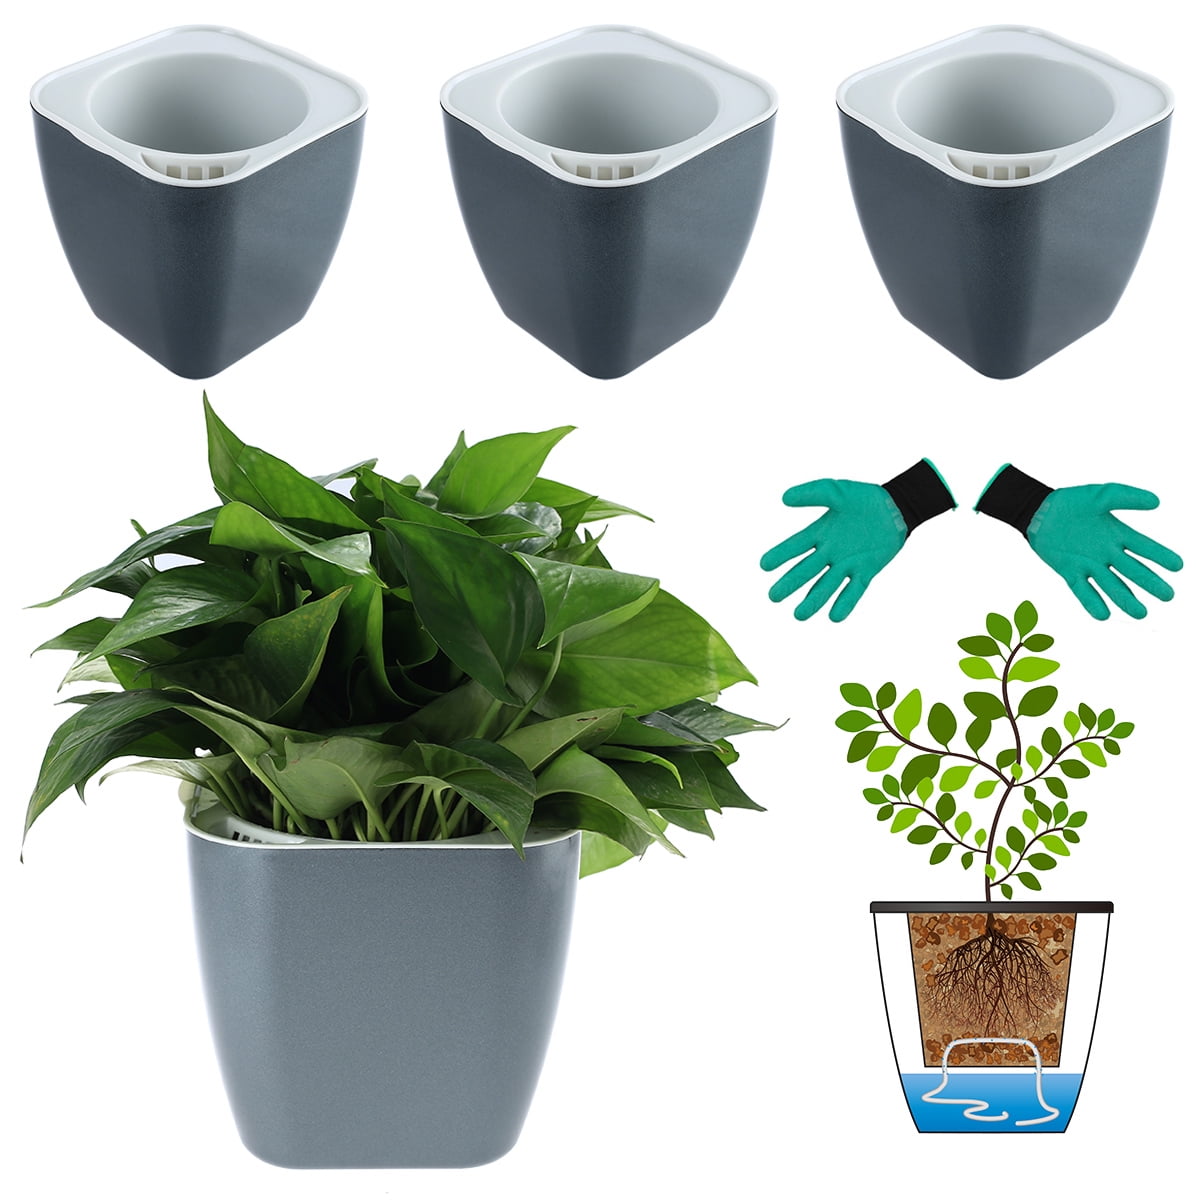 Diameter 12.8, Graphite DecoPots Pack of 3 Herbs Flower Pot with Bottom Watering Level Indicator for All House Plants Self Watering Planter Height 12.8 inches Flowers